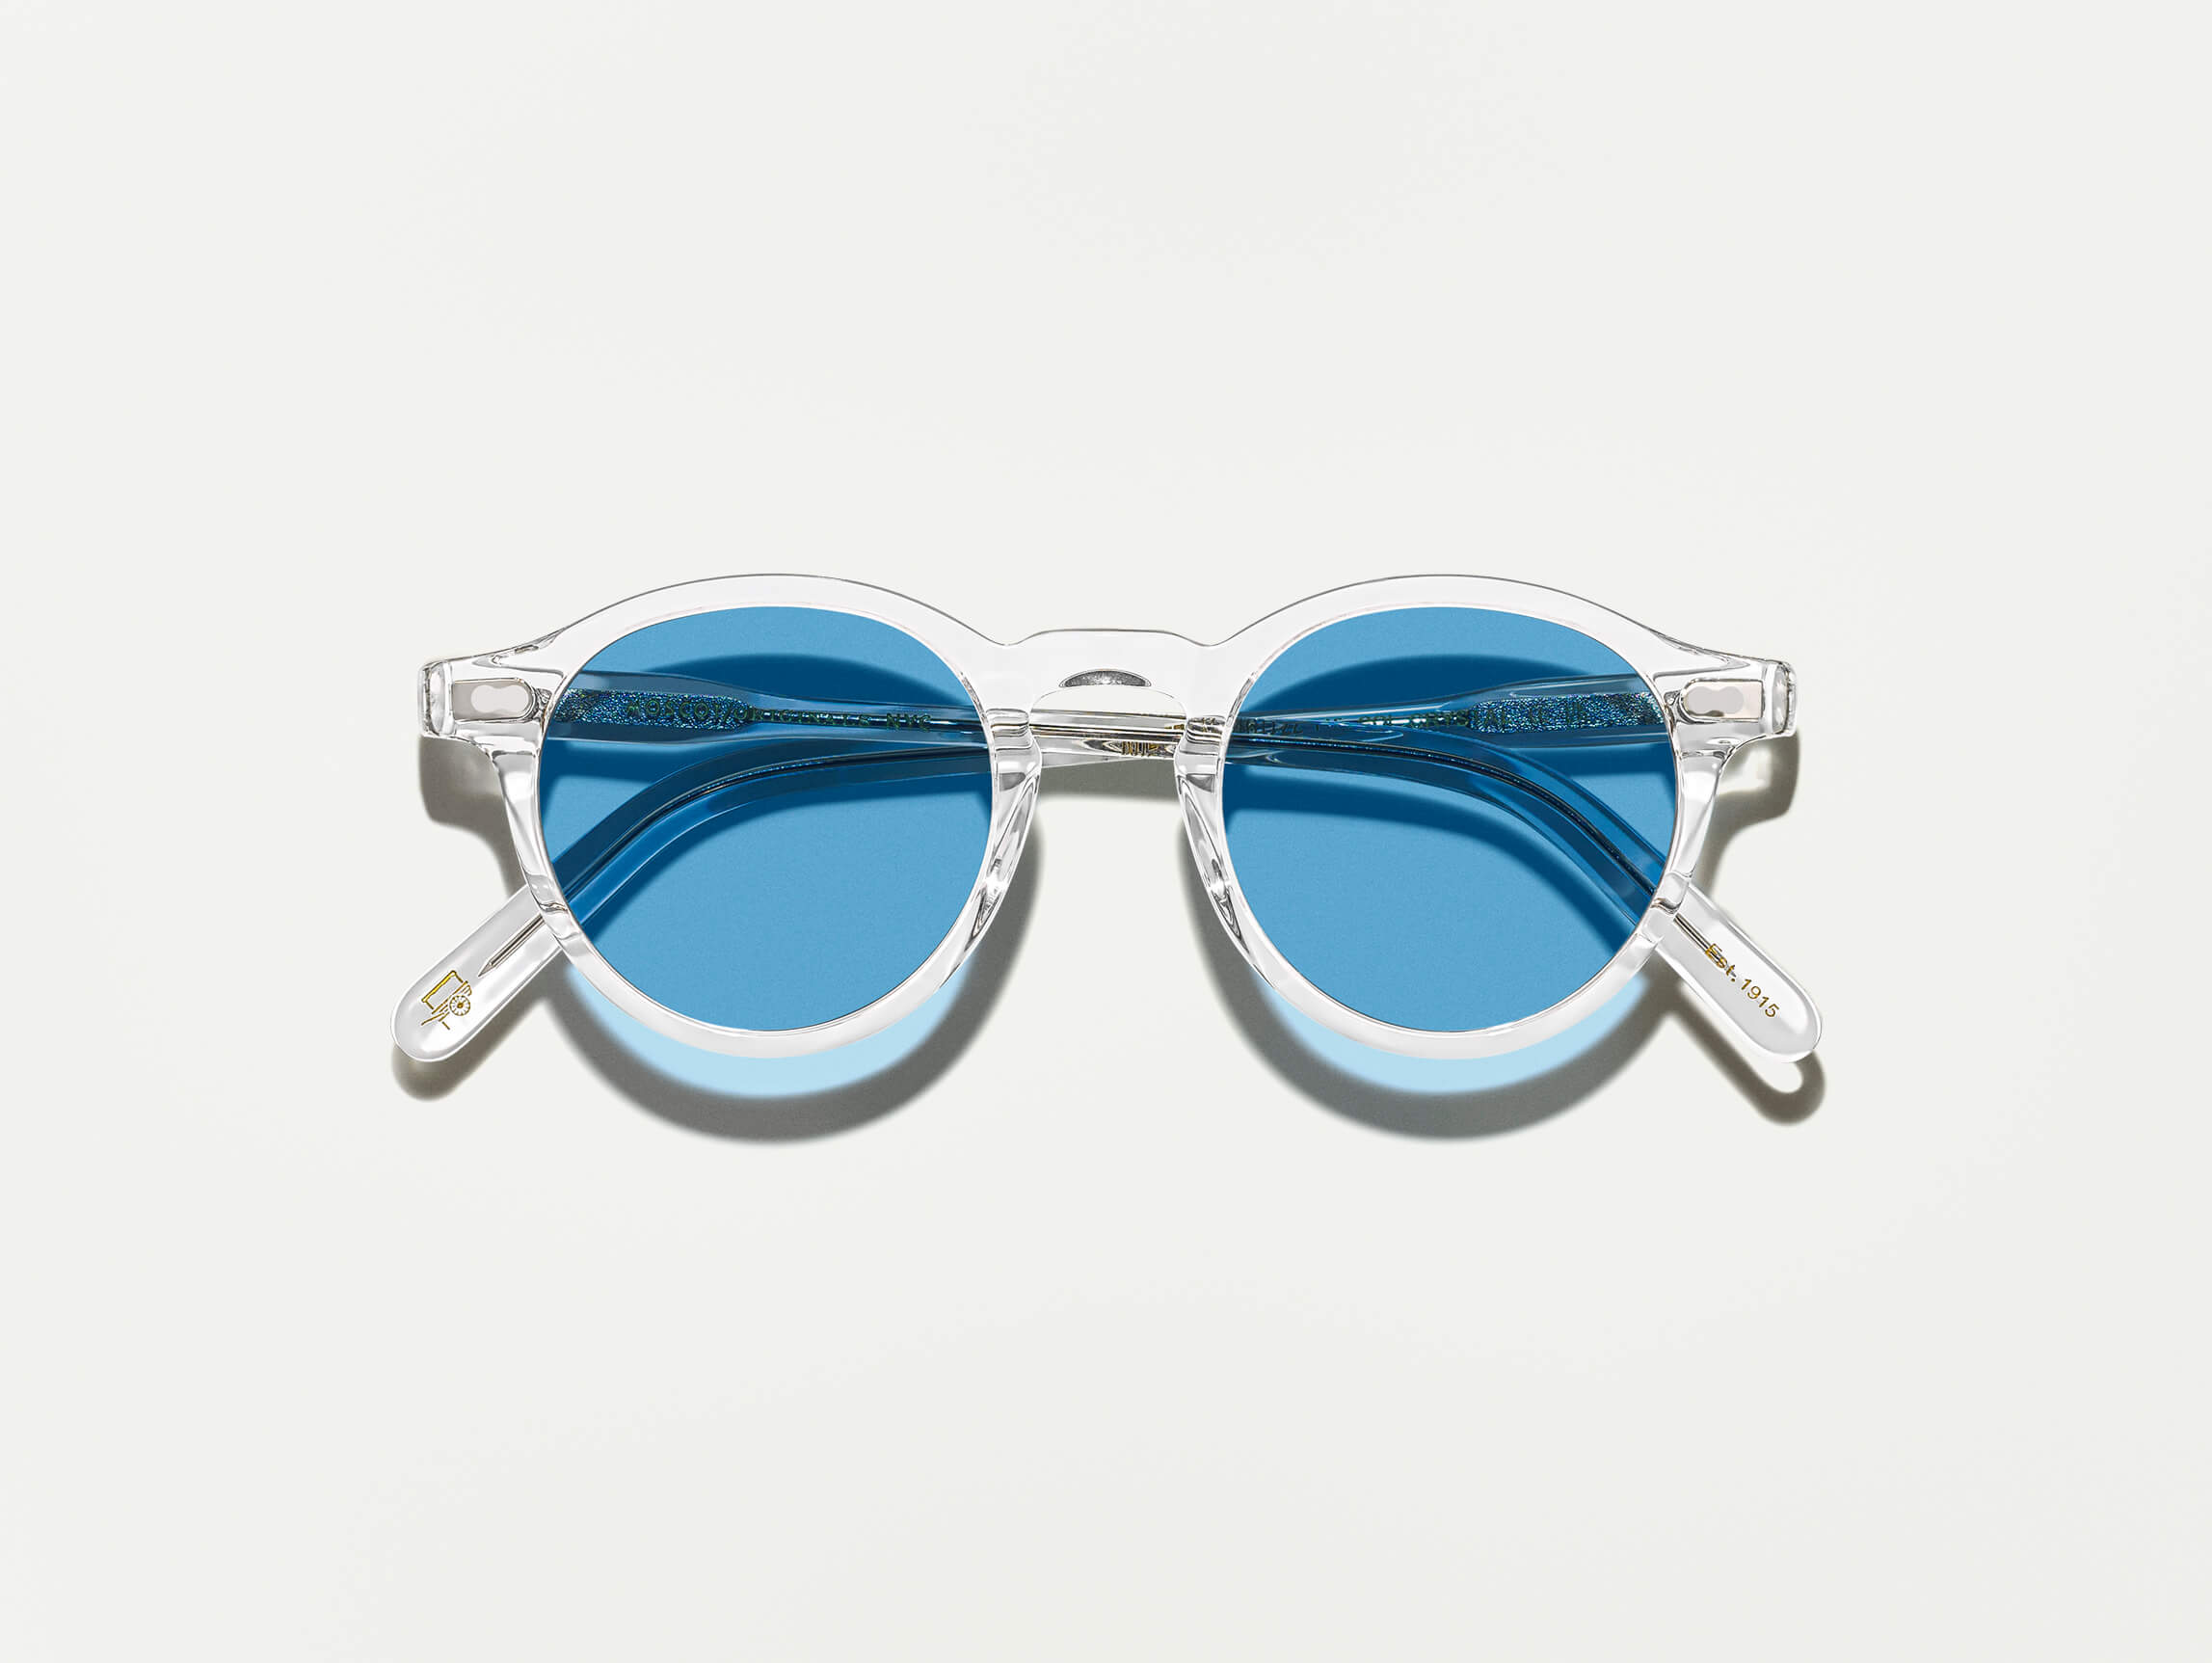 The MILTZEN Crystal with Celebrity Blue Tinted Lenses